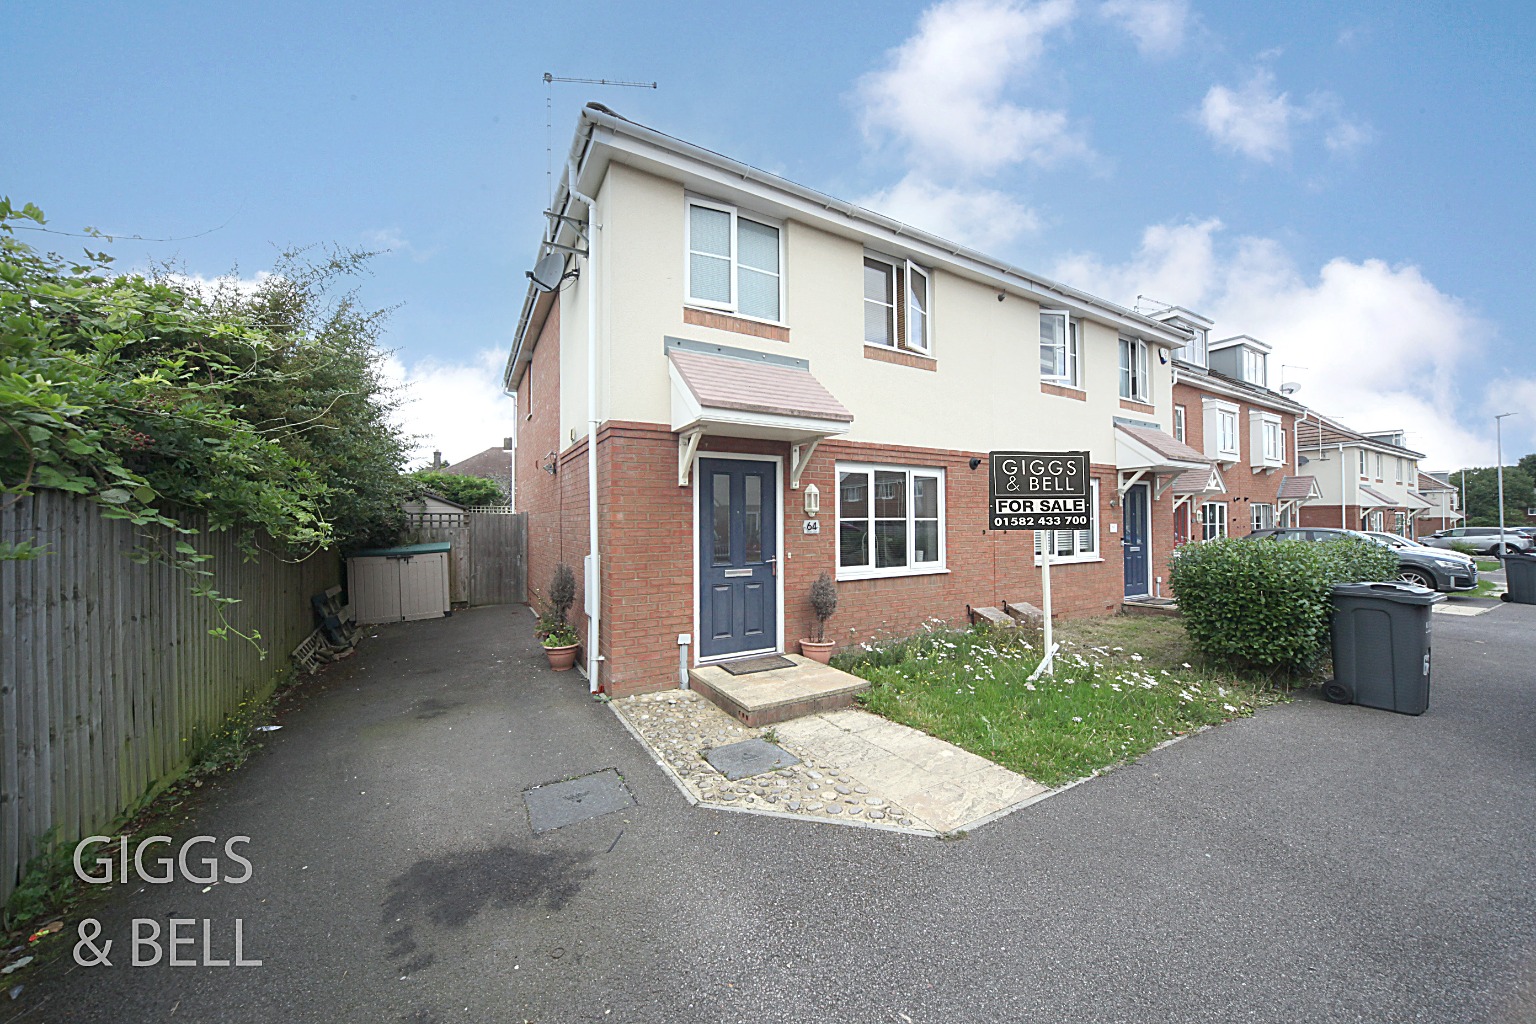 3 bed semi-detached house for sale in Verde Close, Luton - Property Image 1